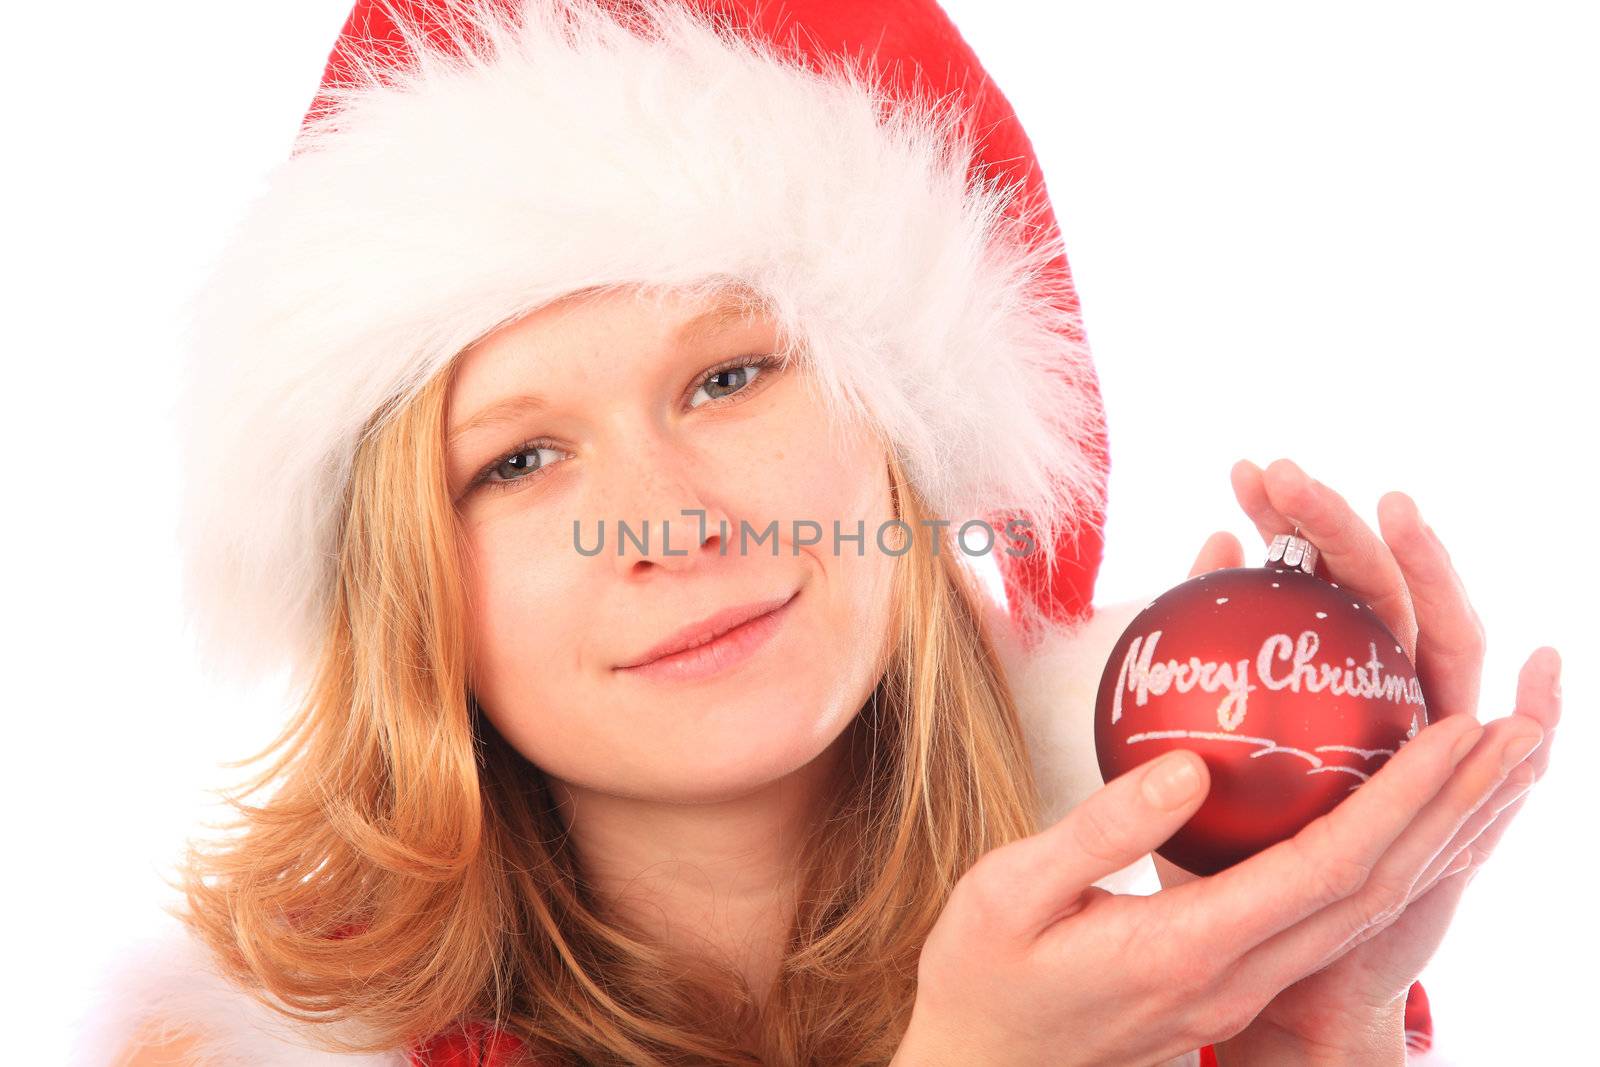 Miss Santa is holding a red christmas tree ball - "Merry Christmas" is written on the ball